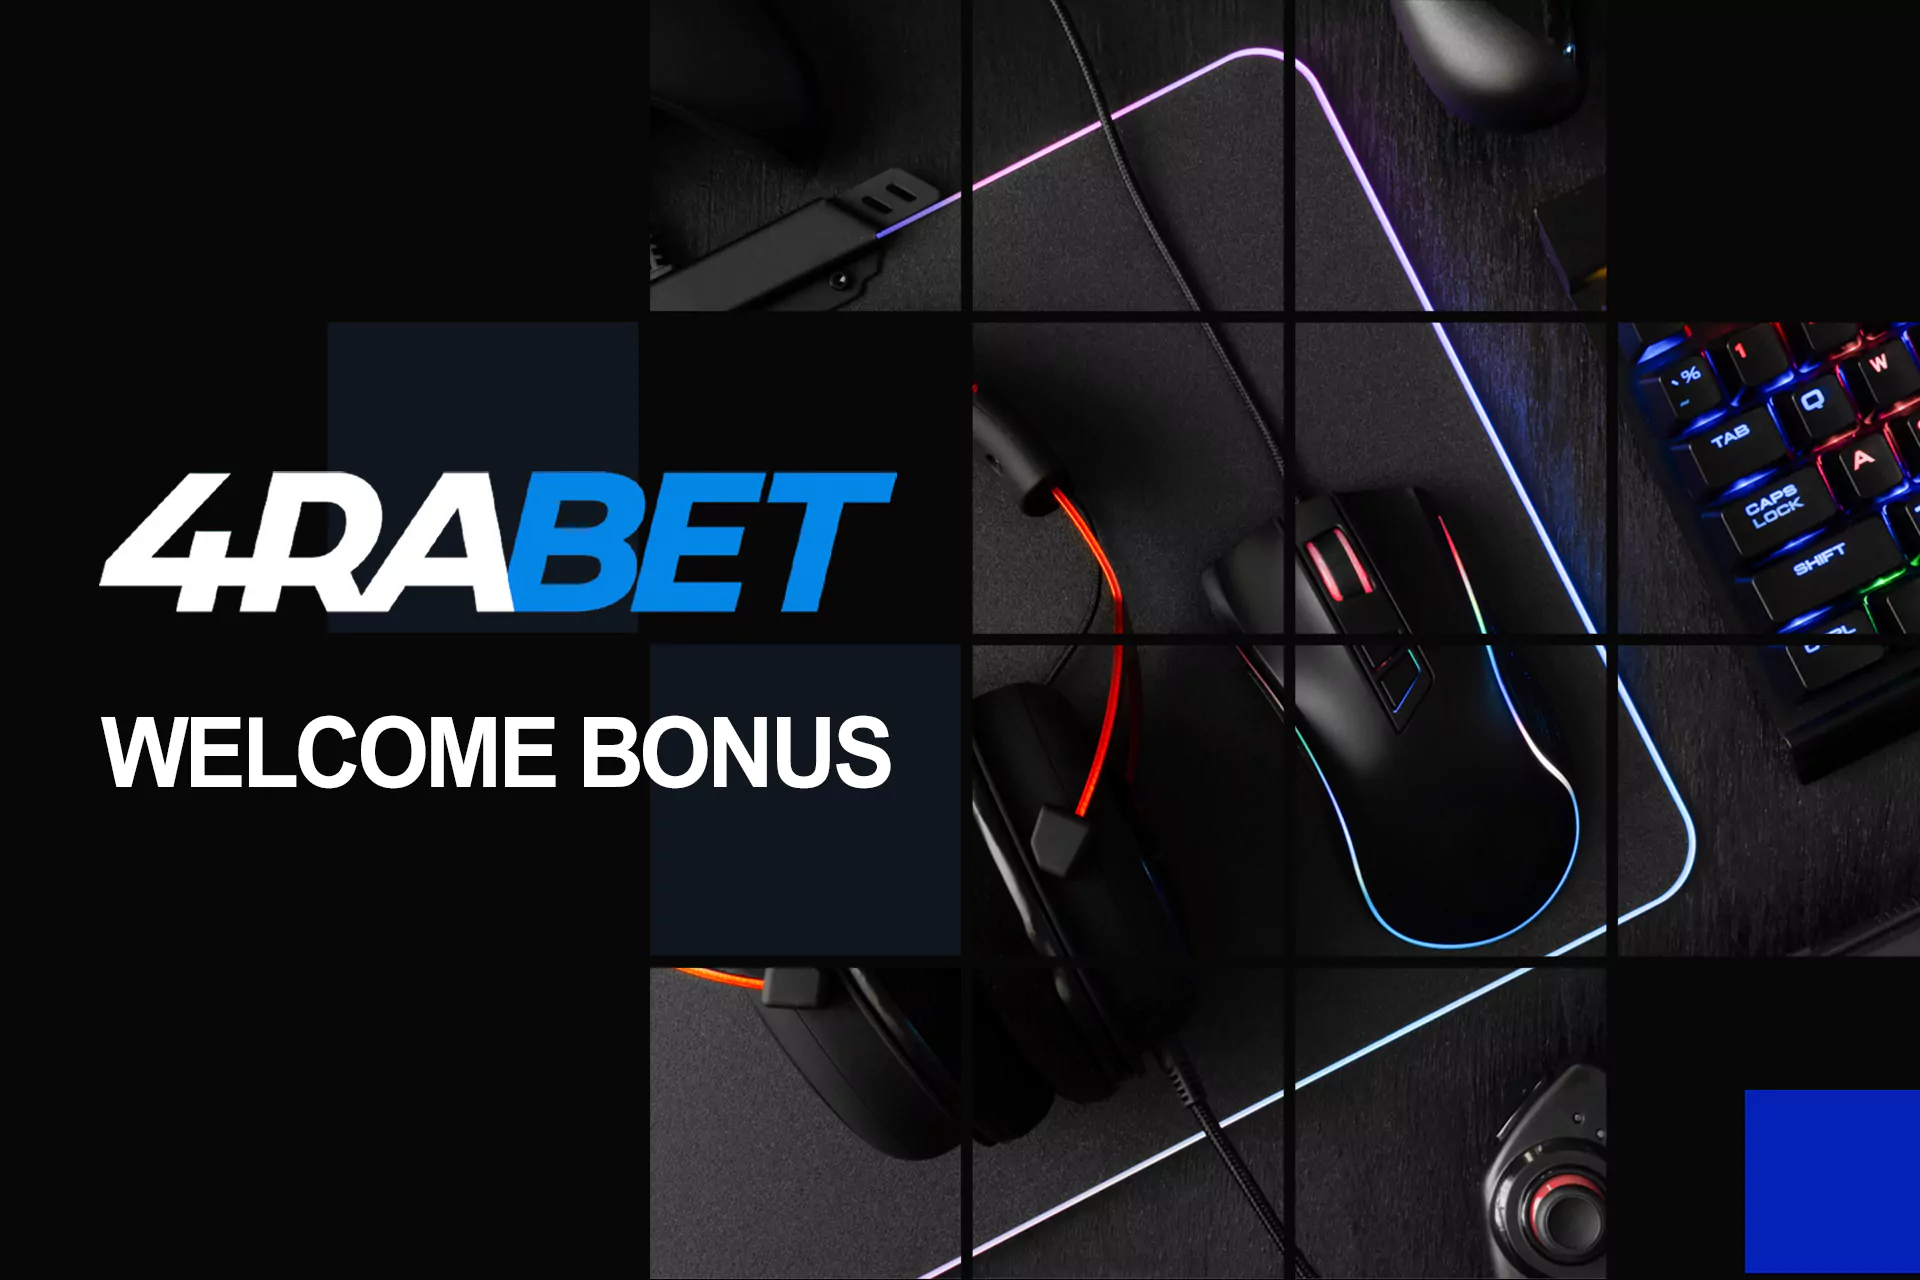 During registration claim a welcome bonus on betting.